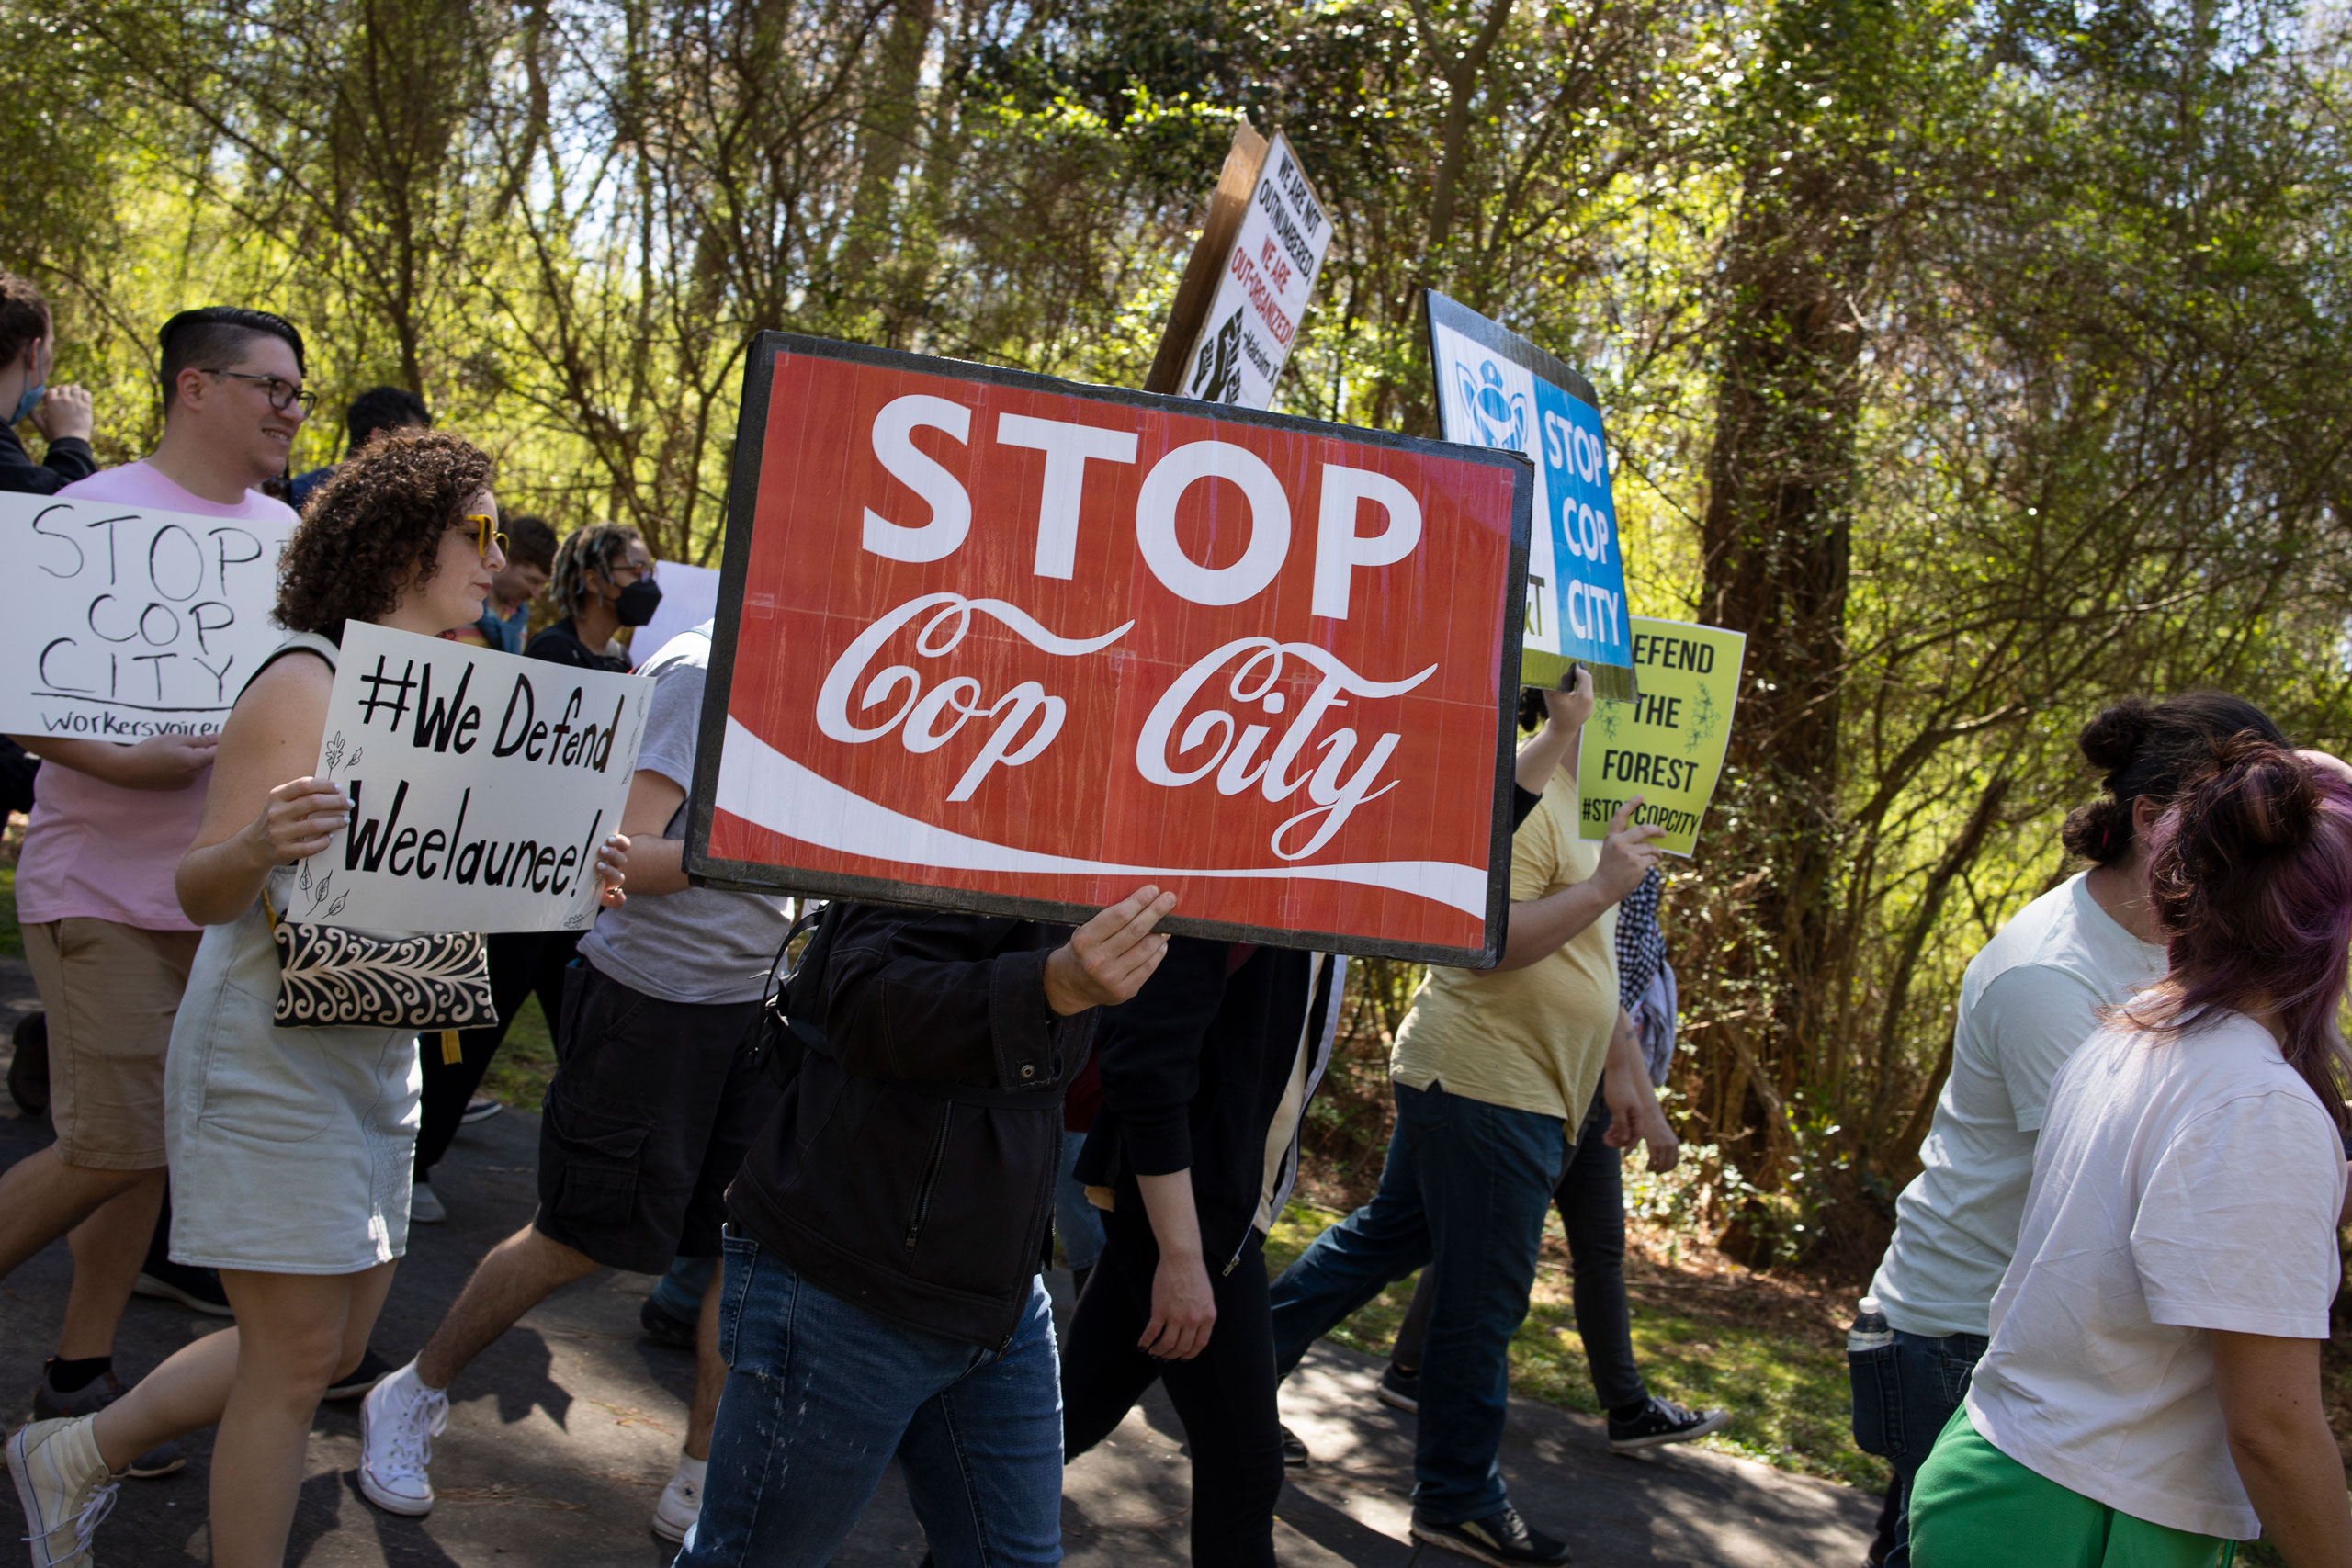 Environmental activists hold a rally and a march through the Atlanta Forest, a preserved forest Atlanta that is scheduled to be developed as a police training center, on March 4, 2023. (Andrew Lichtenstein—Corbis/Getty Images)